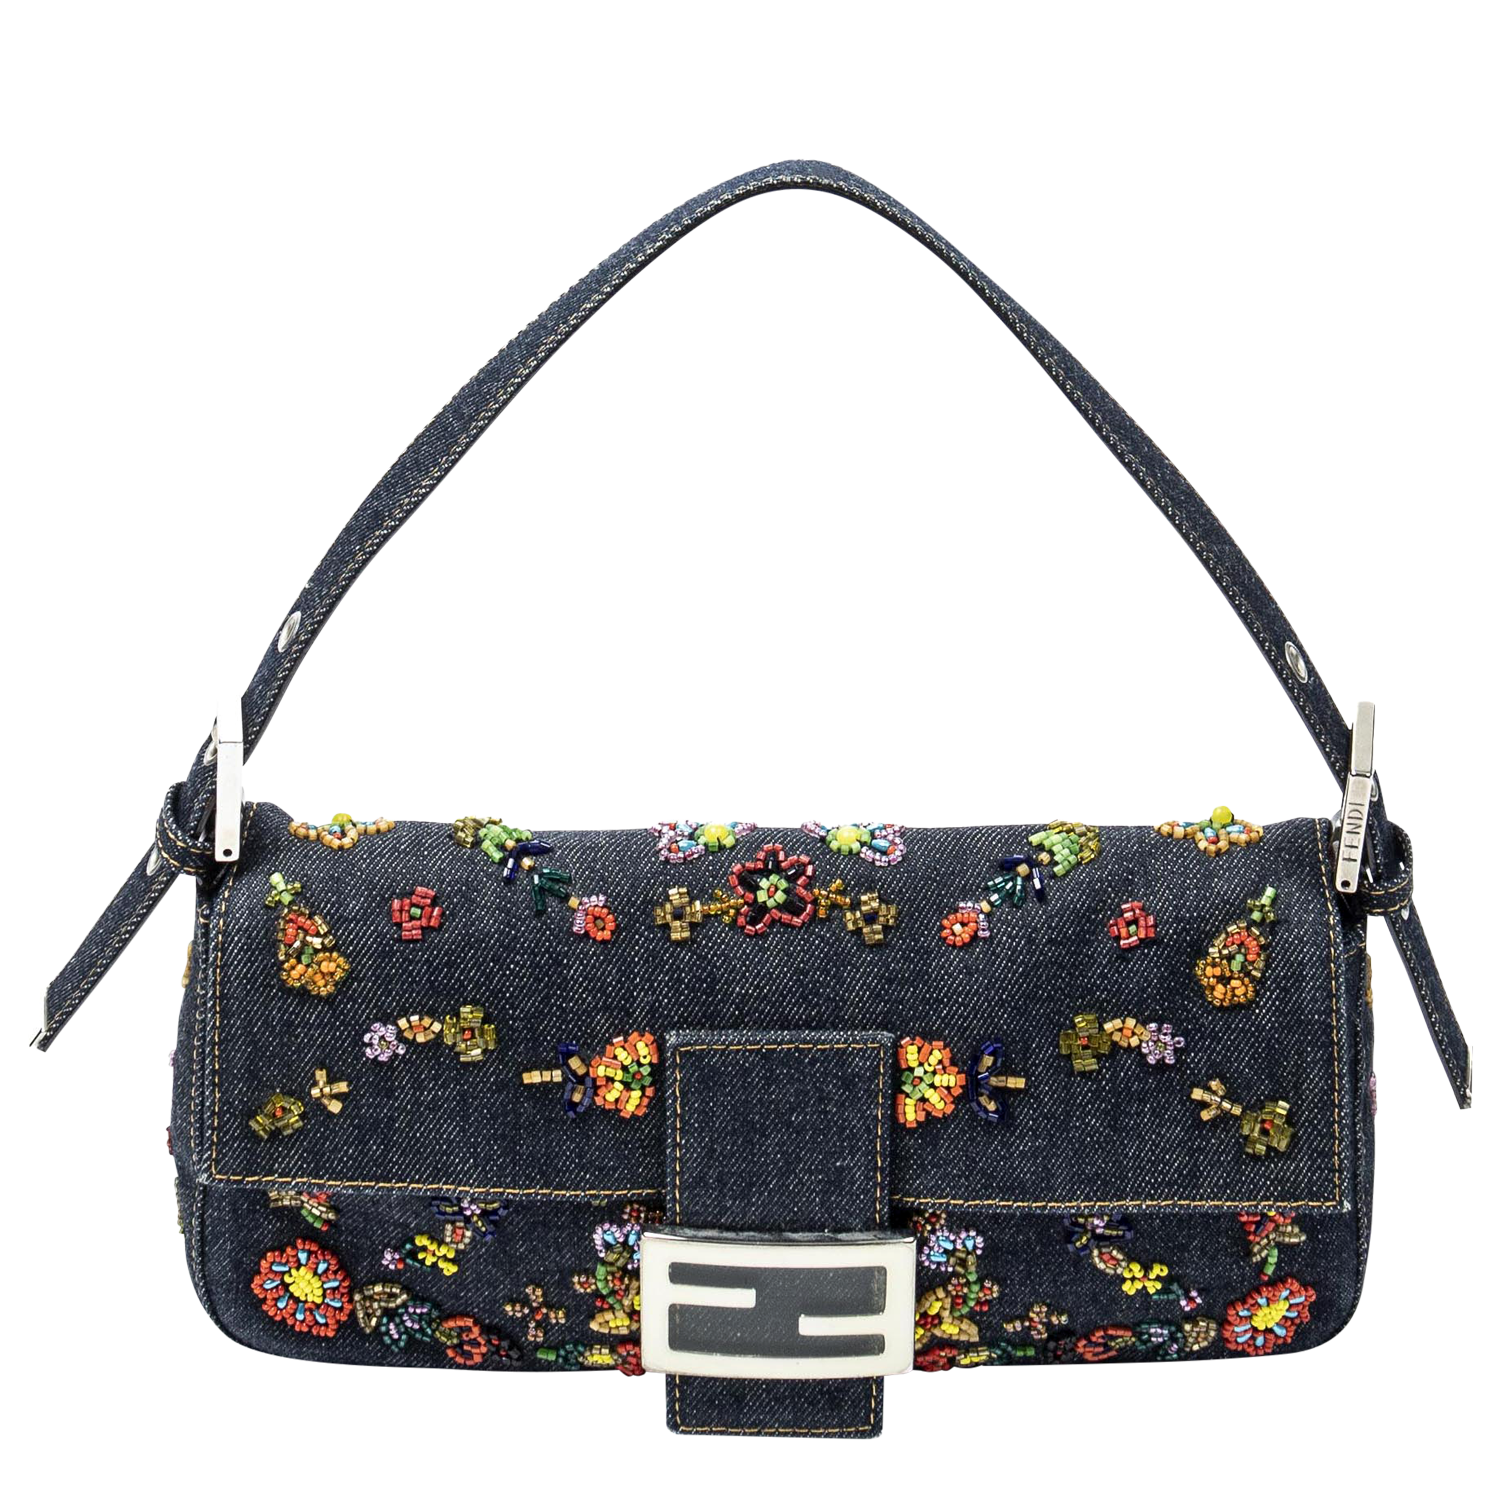 Fendi Limited Edition Denim Embroidered Beads Baguette